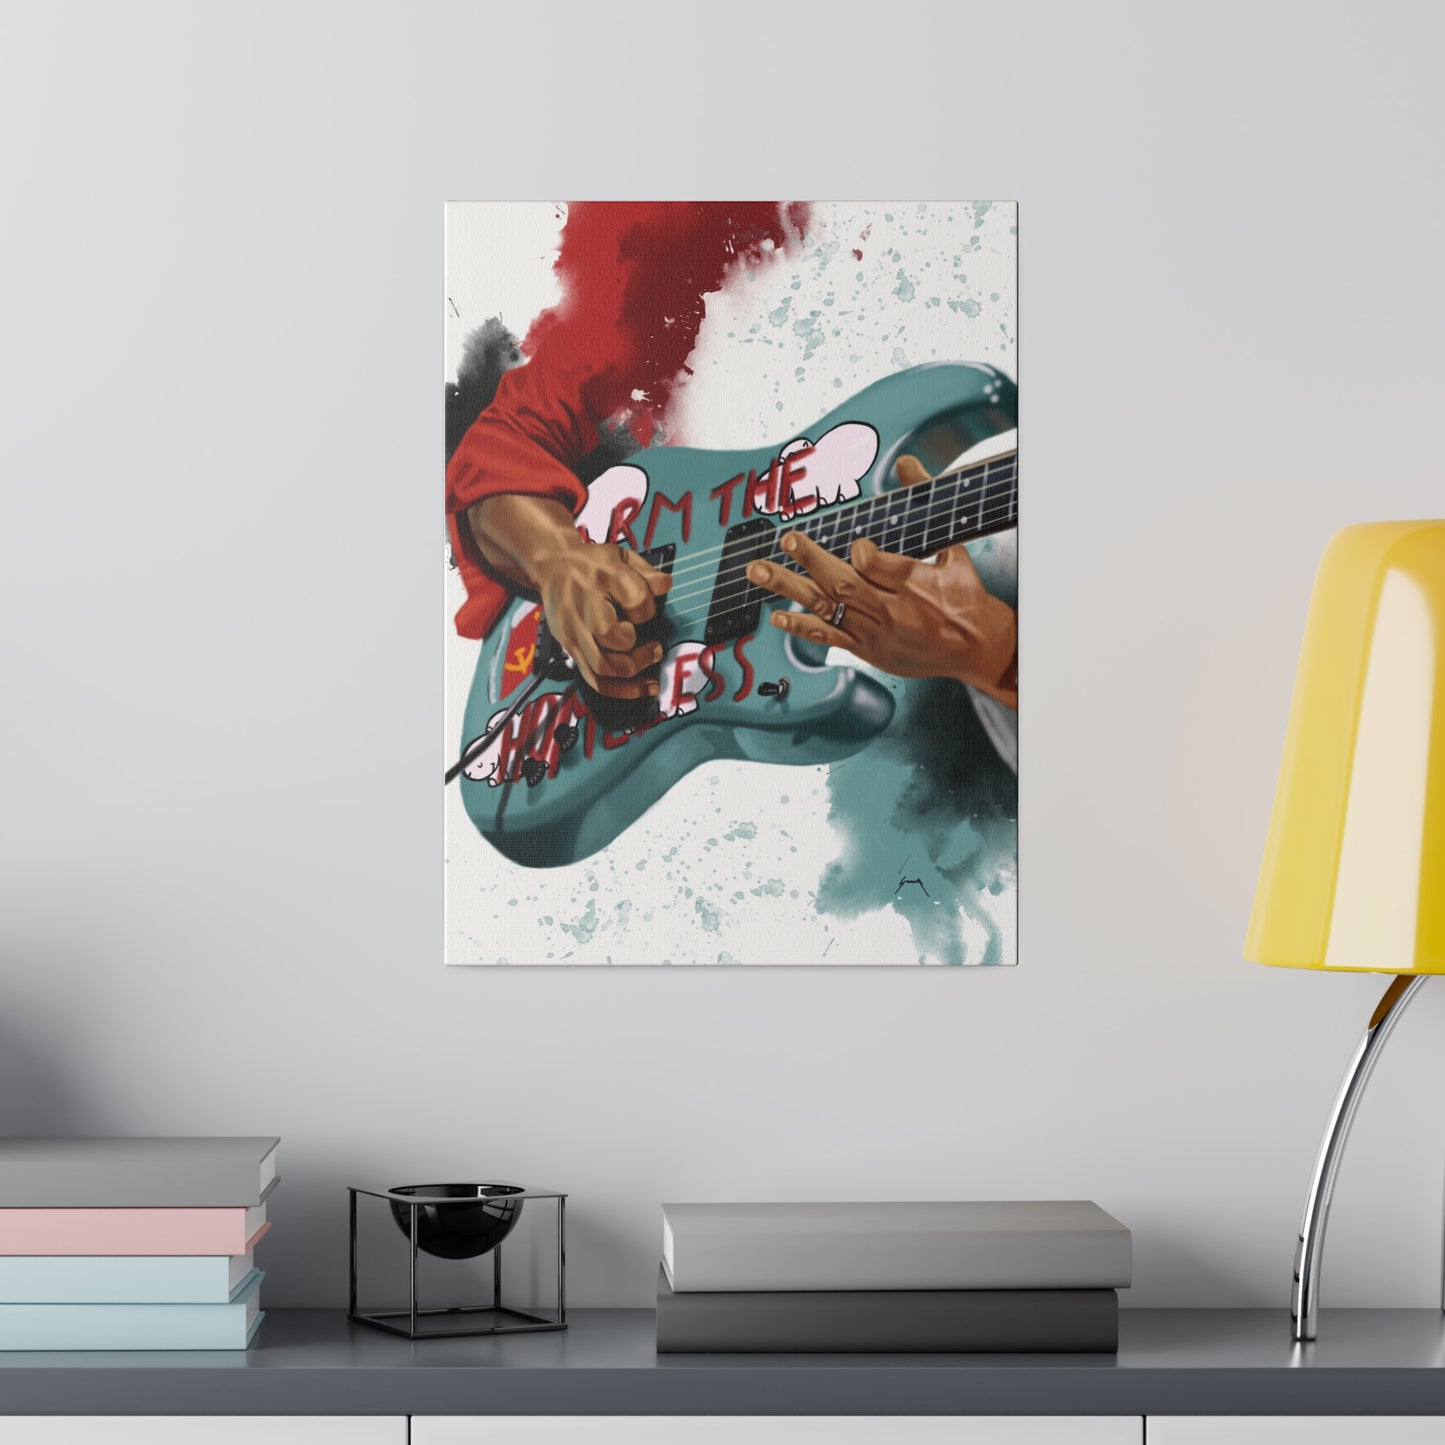 Digital painting of Tom's electric guitar printed on canvas